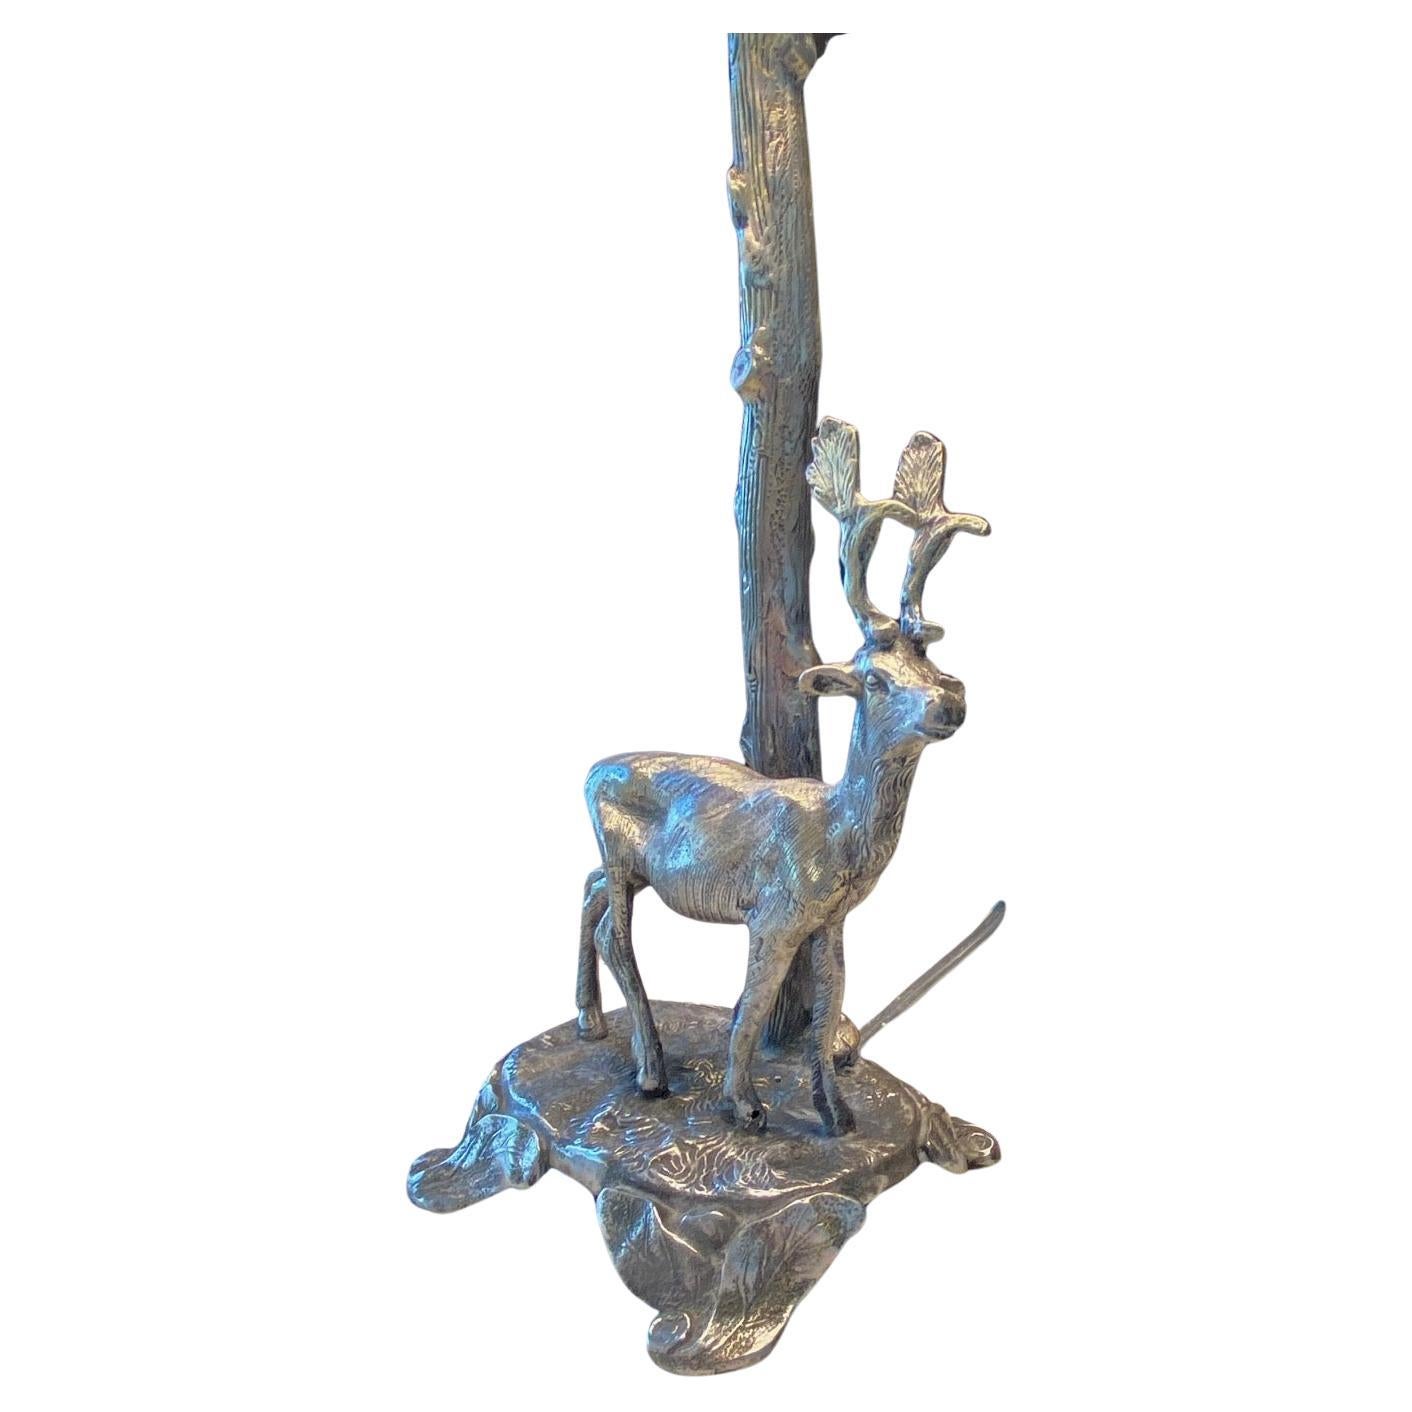 Valenti style stag table lamp, unsigned. Fine midcentury quality solid silvered plate on bronze sculpture most likely by the highly sought after Spanish artist Valenti. This sculpture depicts a wild stag or deer under a beautifully sculpted simple